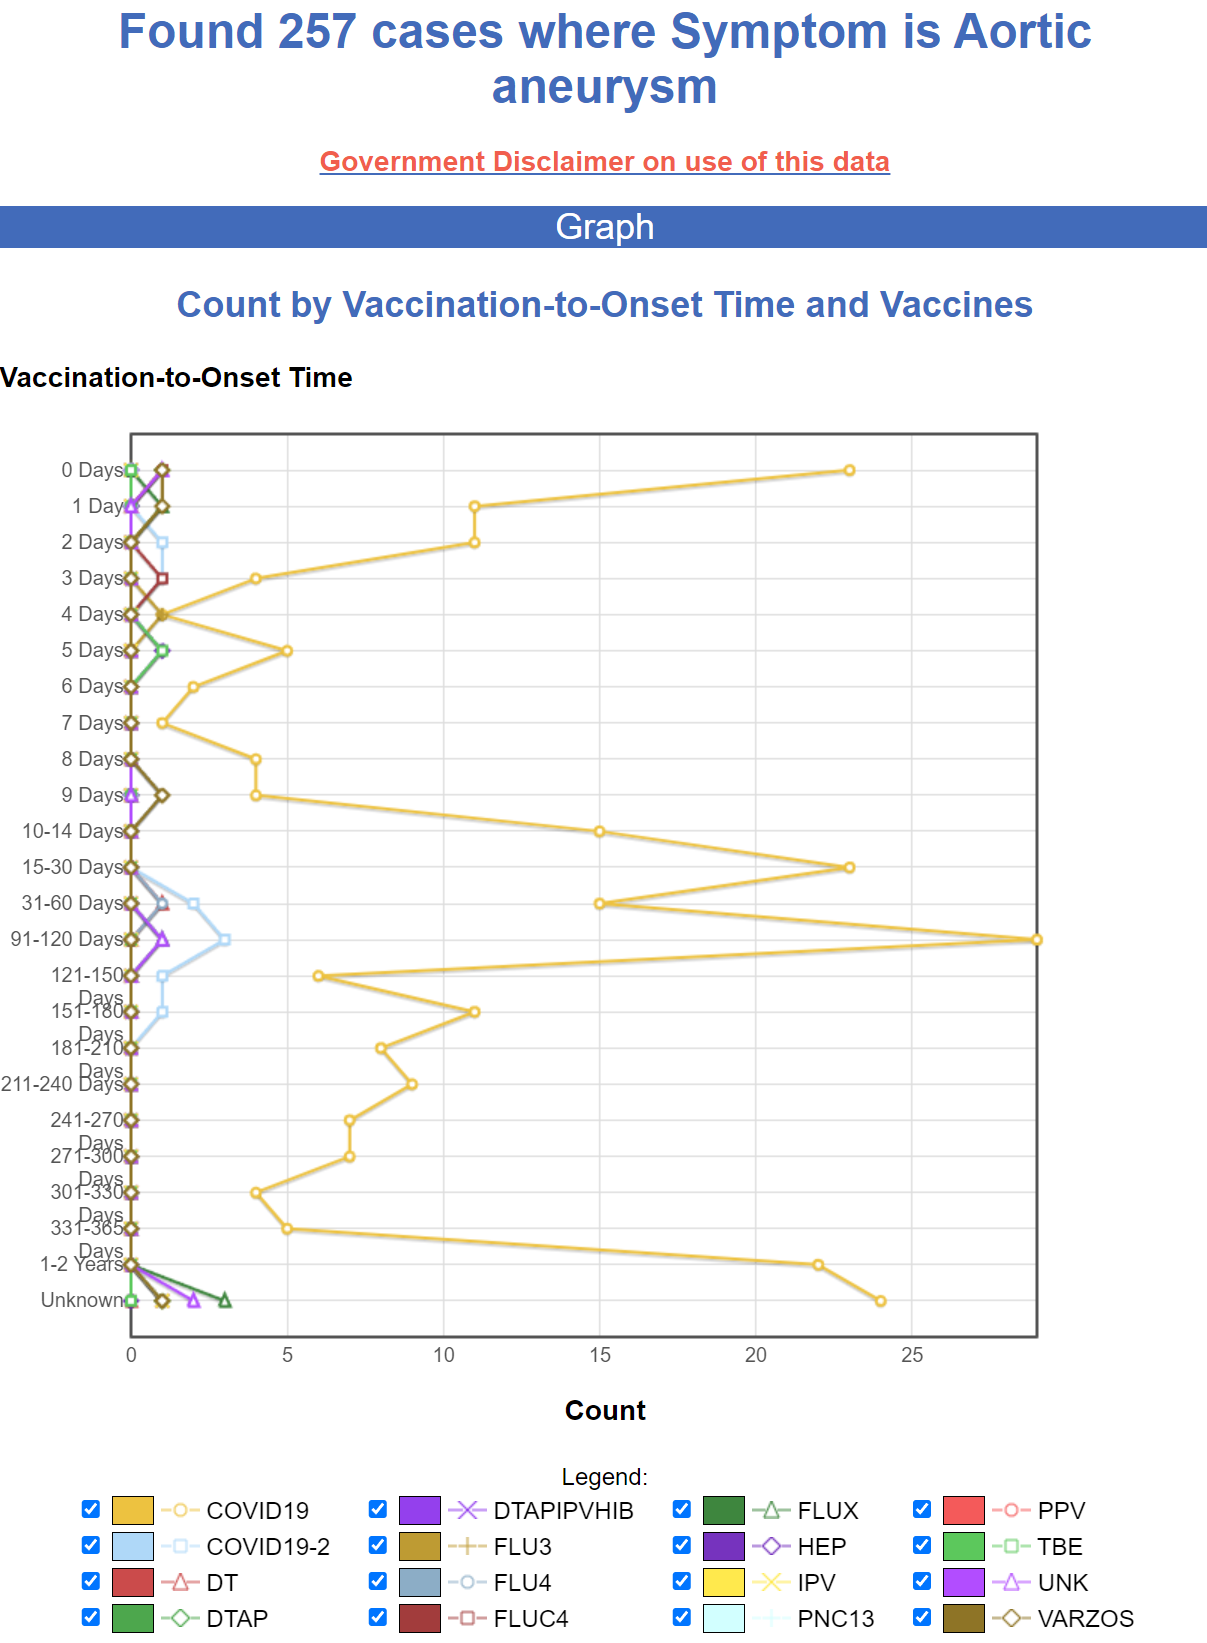 Is the CDC totally blind to all the adverse events from the COVID vaccines? Https%3A%2F%2Fsubstack-post-media.s3.amazonaws.com%2Fpublic%2Fimages%2F80c16da6-b902-47a6-aa18-52d9af650fca_1207x1643